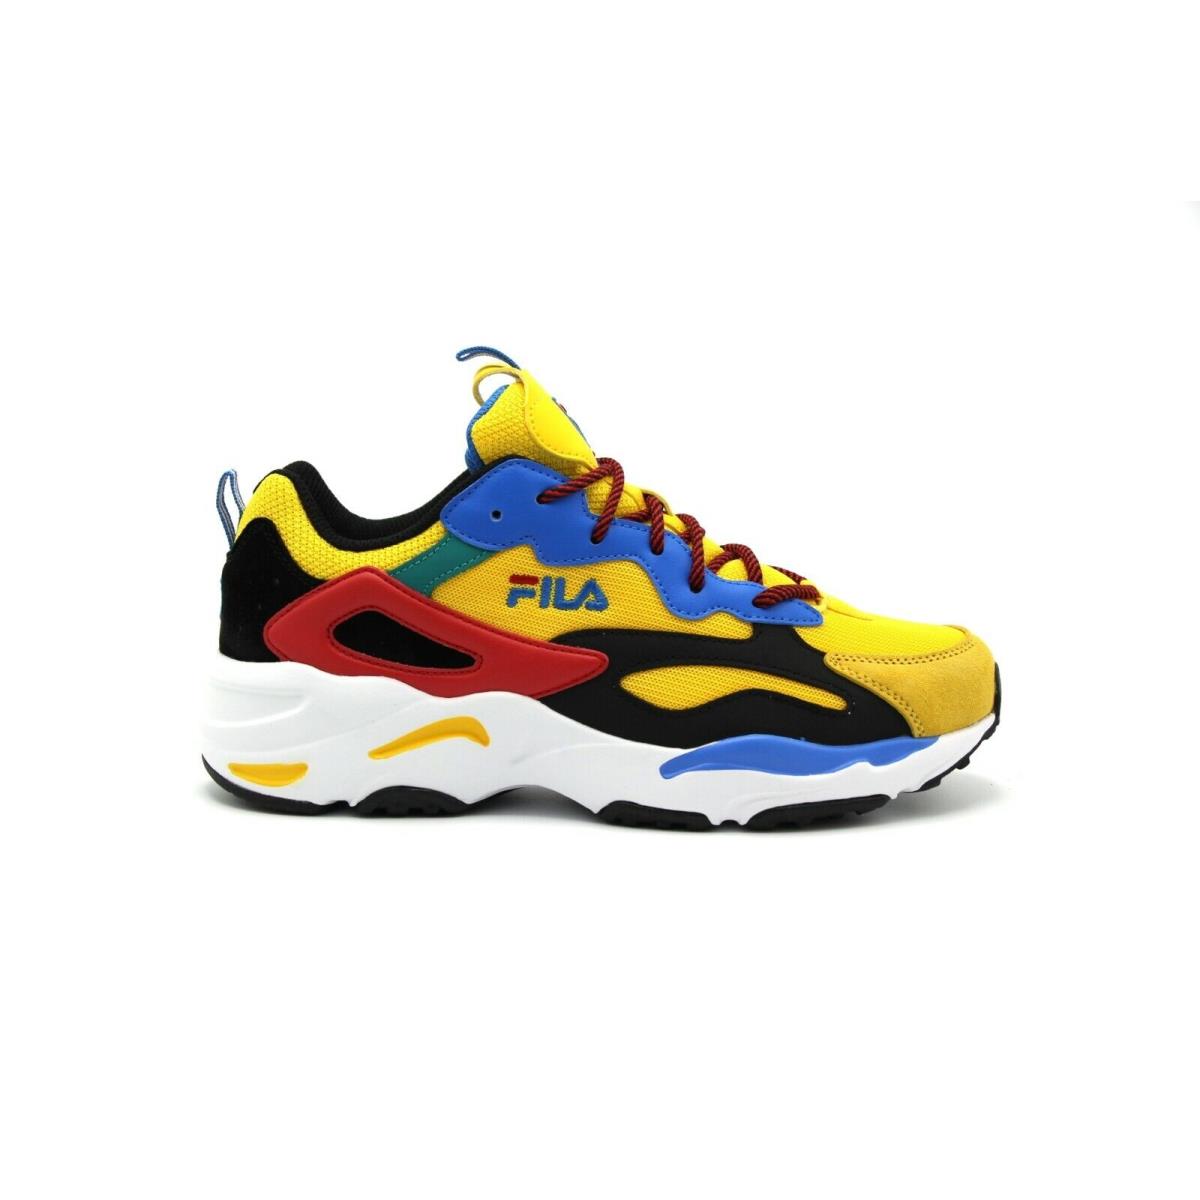 Fila shoes RAY TRACER - Yellow Red Blue Black White 0